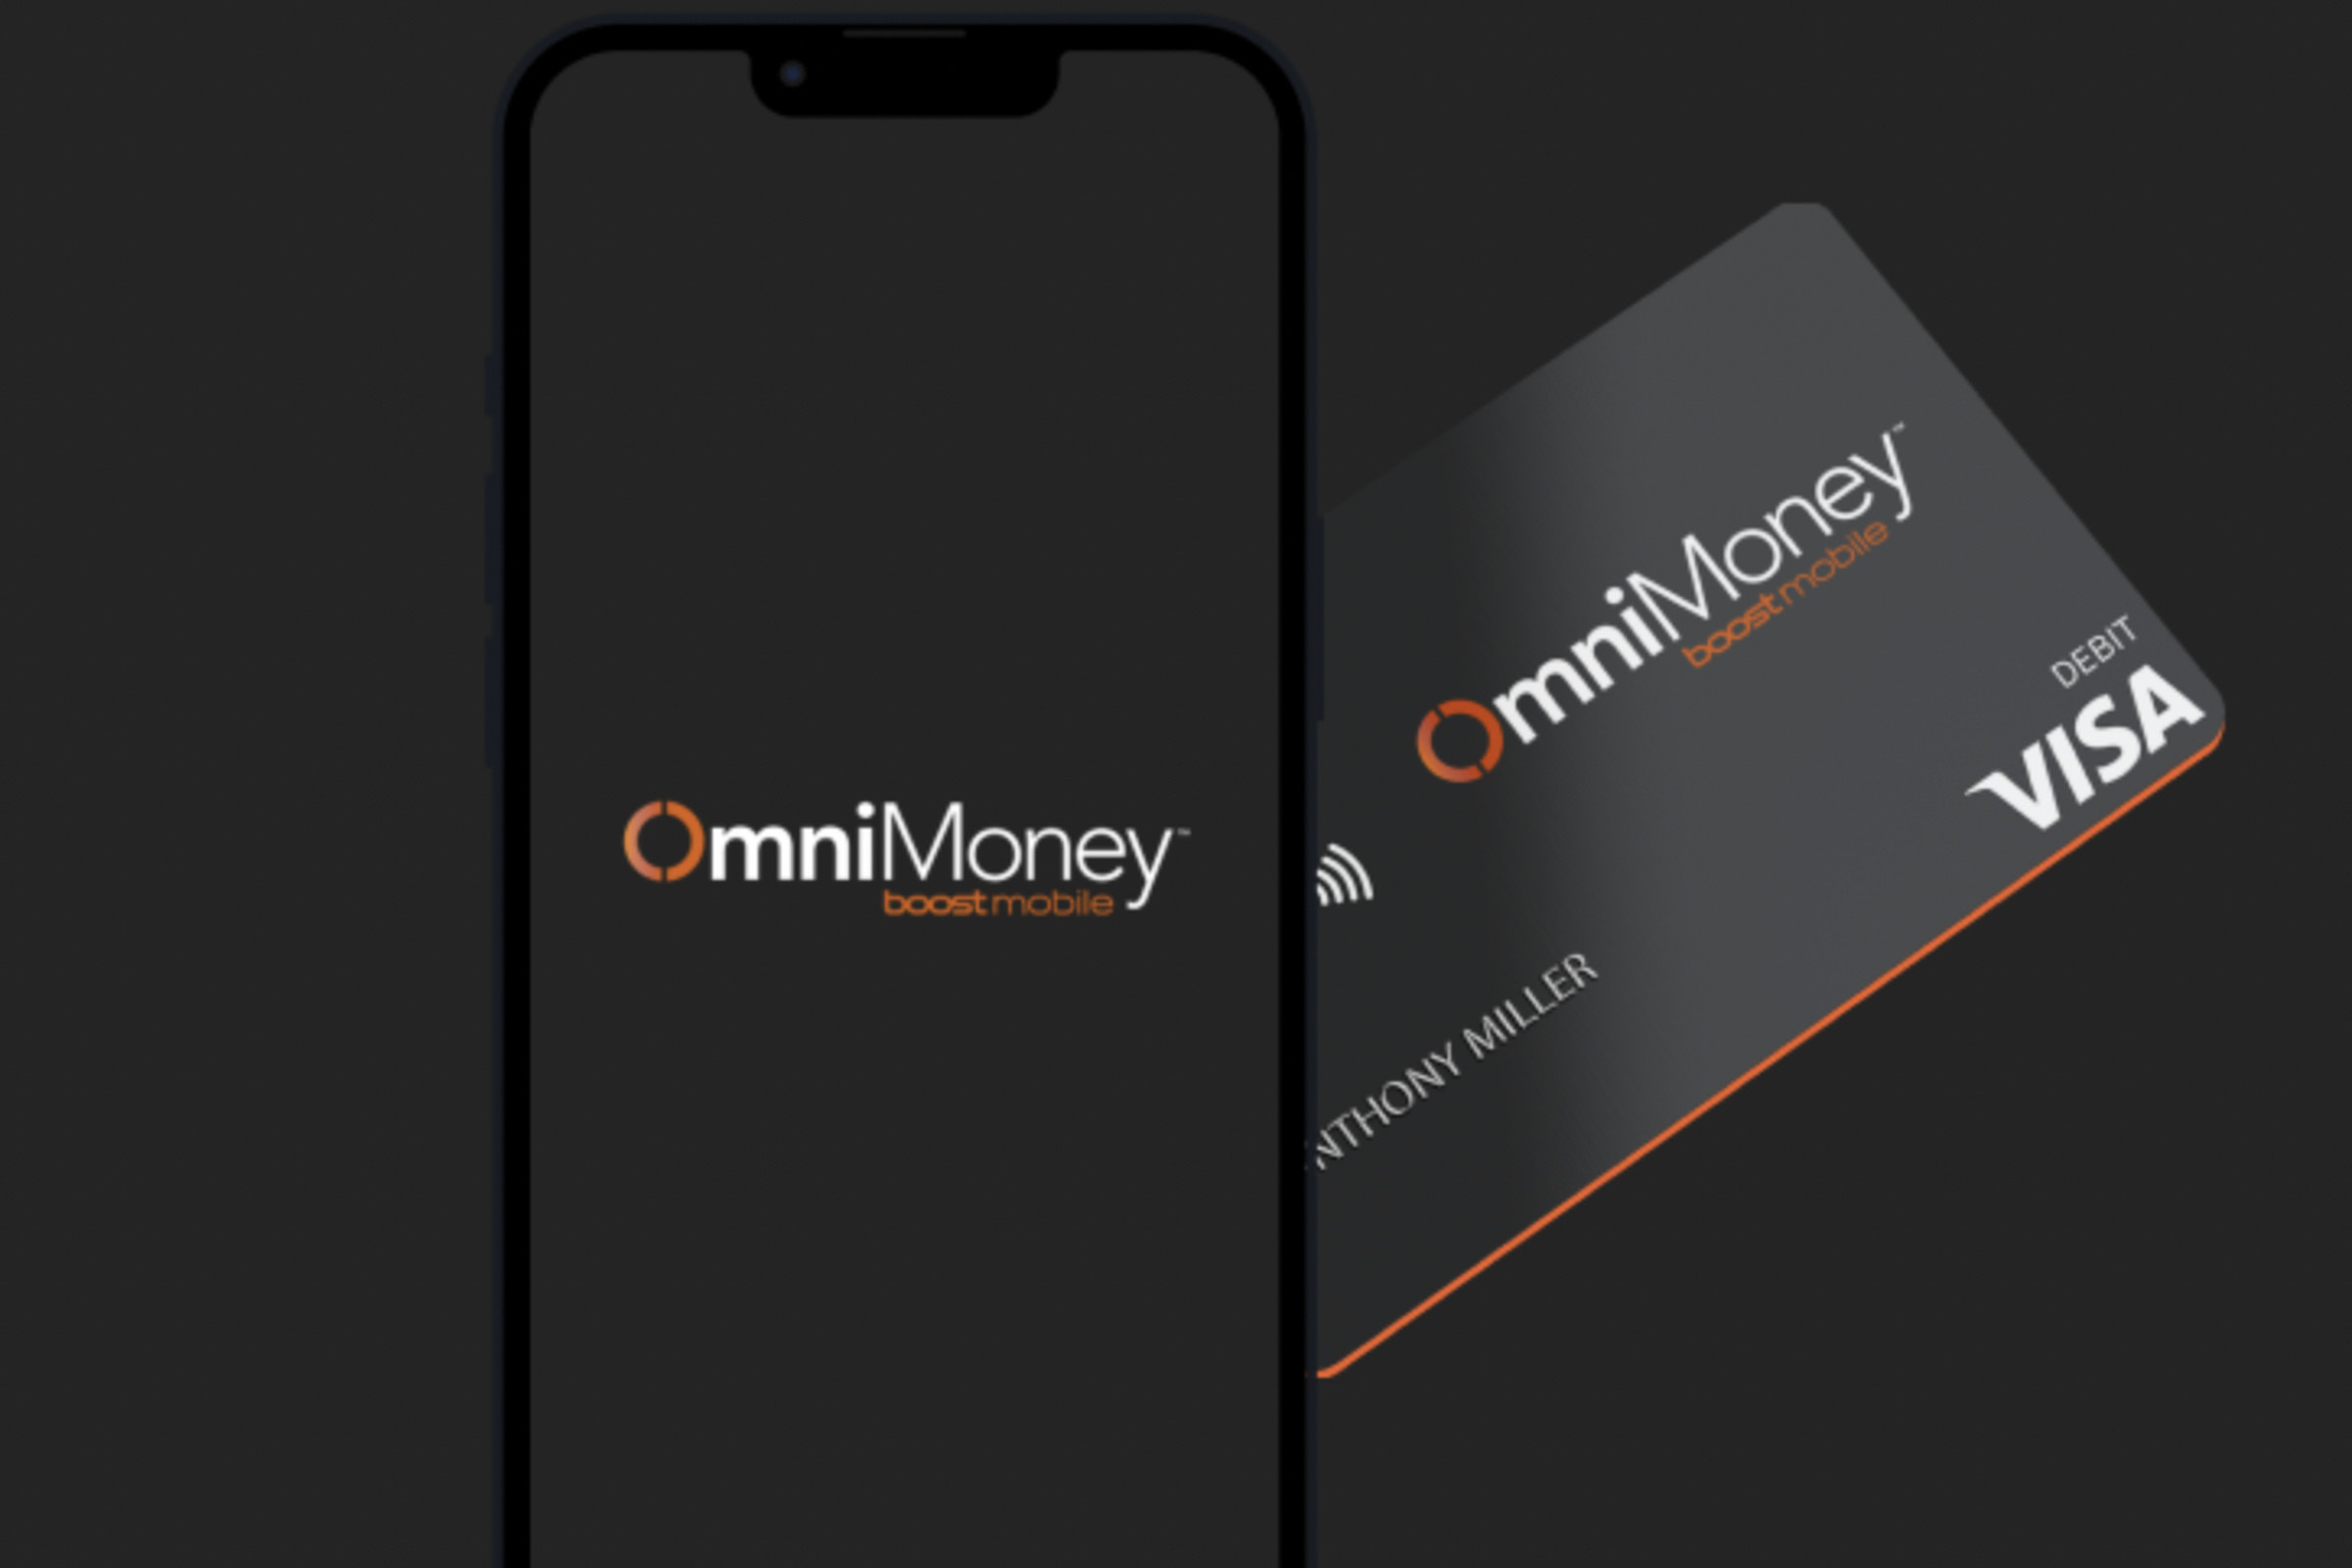 OmniMoney logo on a debit card and phone screen.